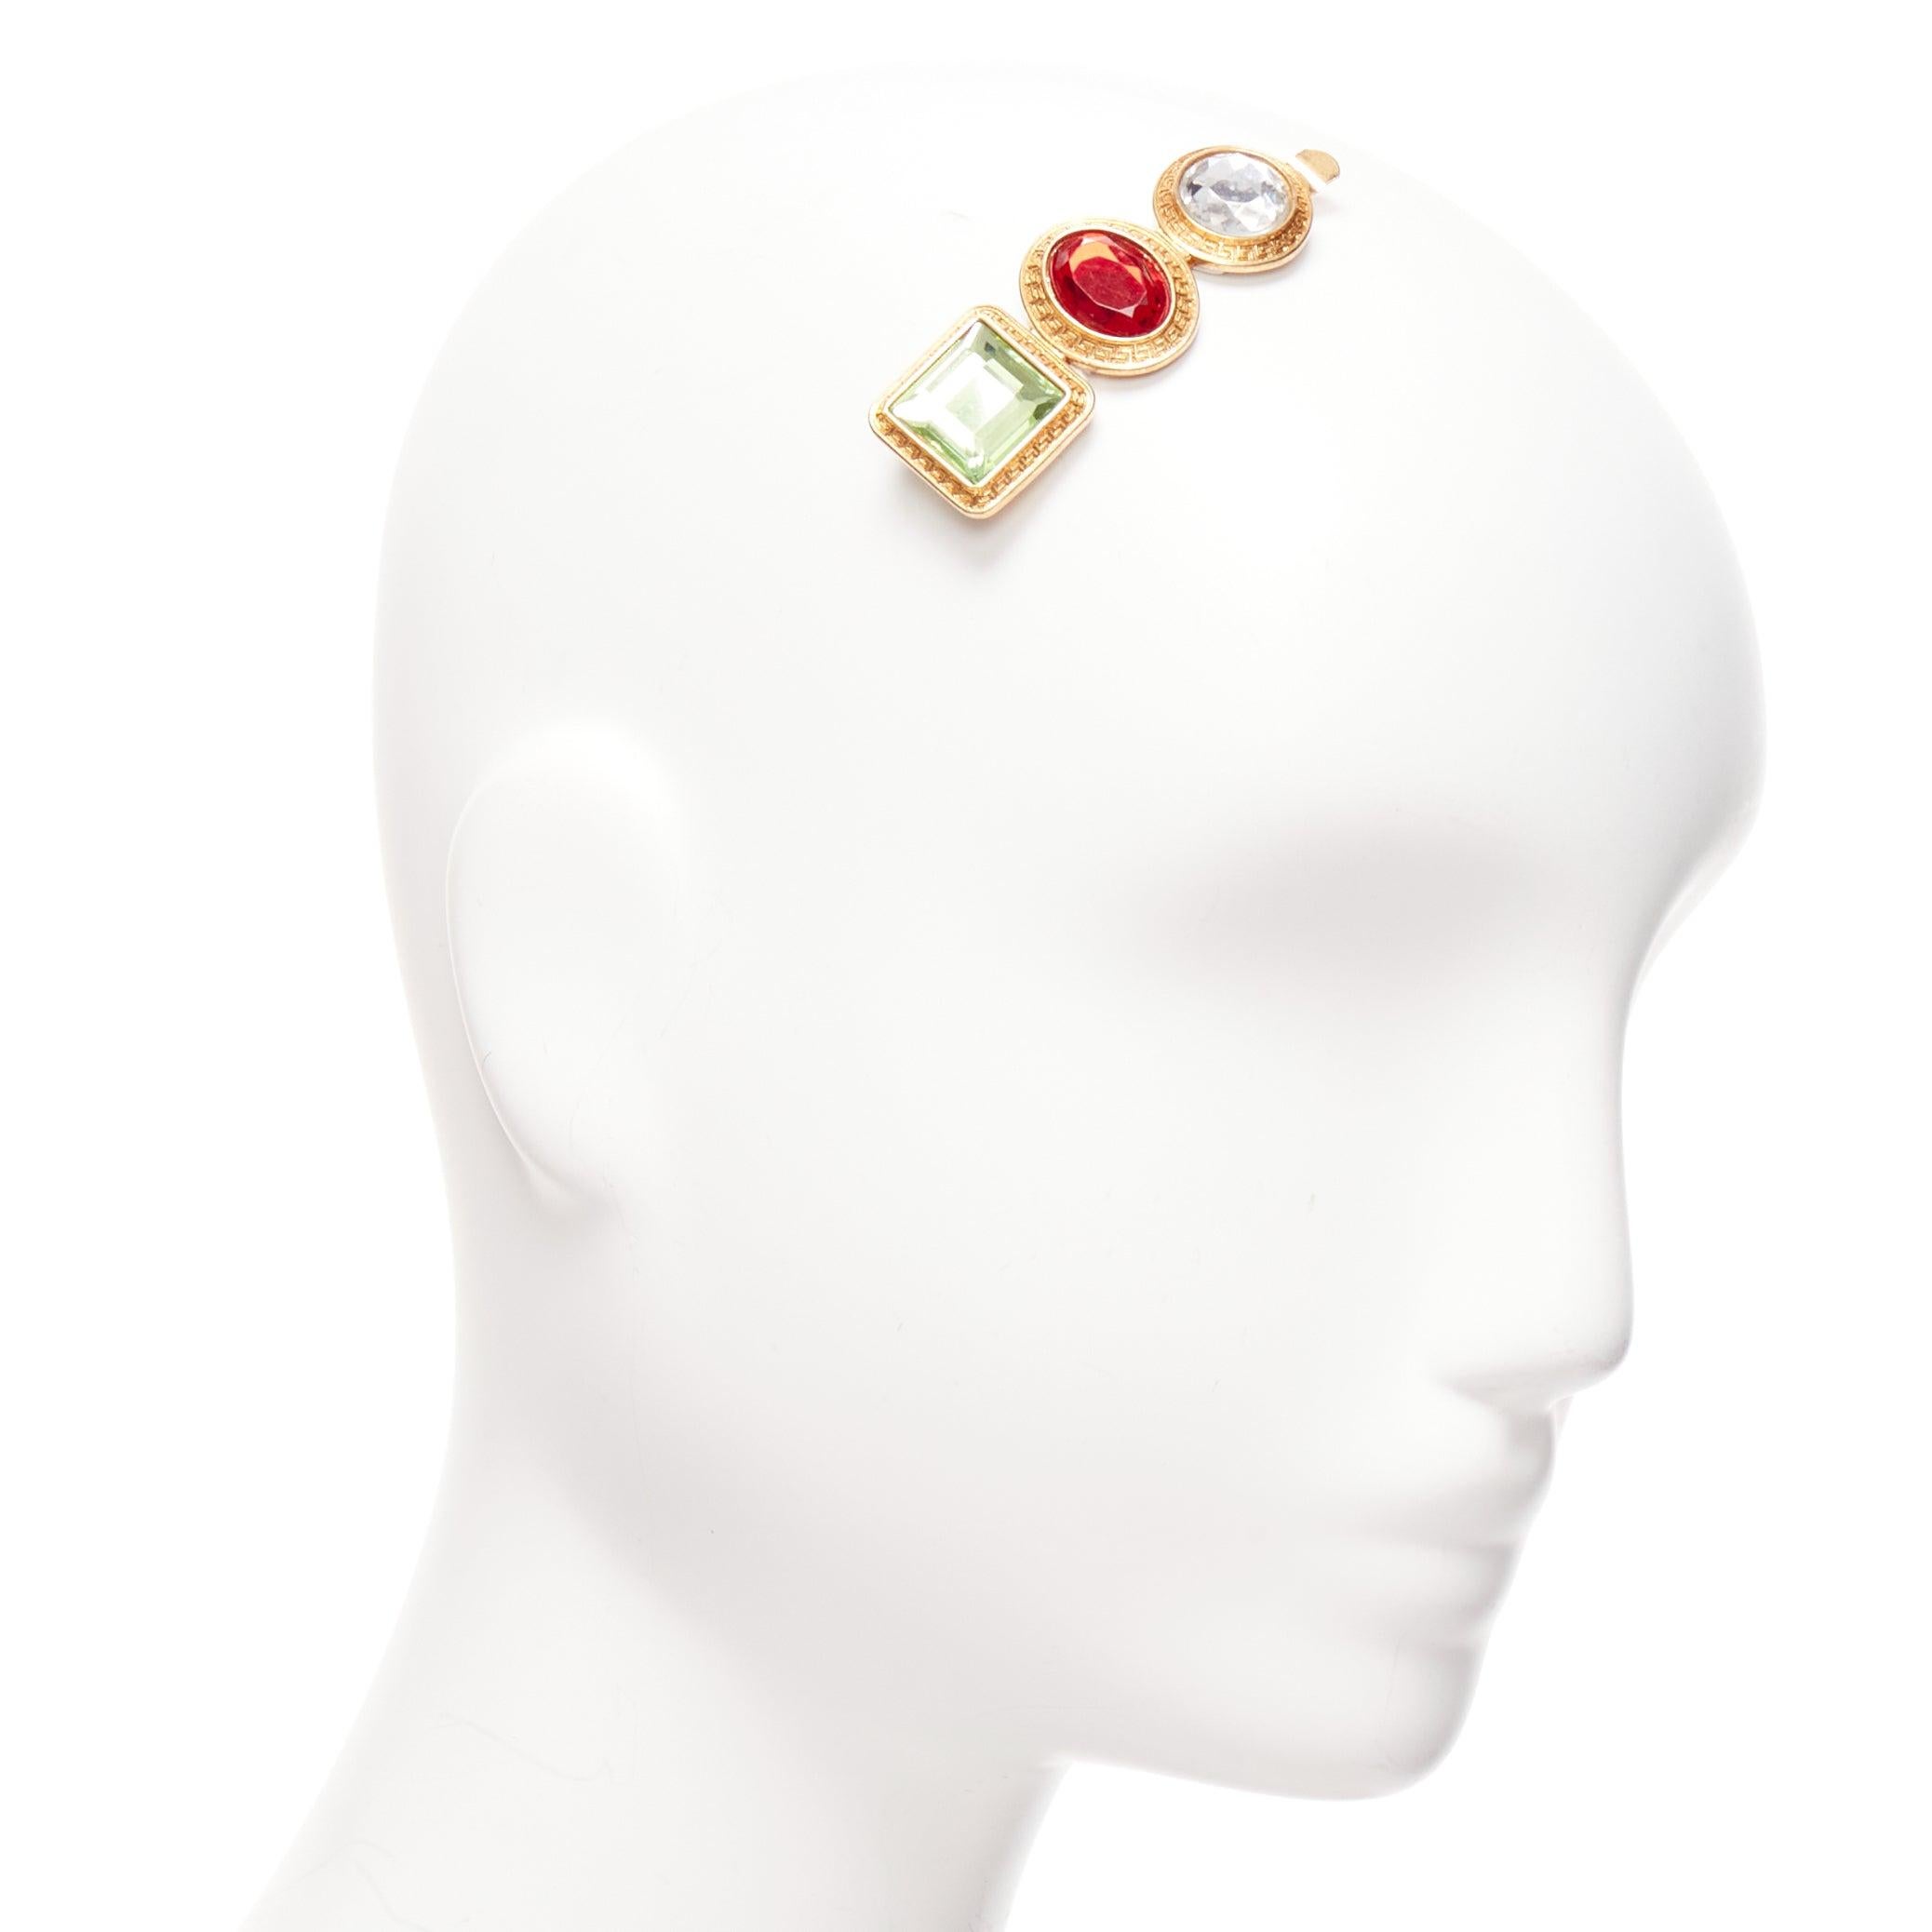 VERSACE green red clear crystal gold baroque jewelled single hairclip
Reference: AAWC/A01007
Brand: Versace
Designer: Donatella Versace
Material: Acrylic, Metal
Color: Red, Green
Pattern: Barocco
Closure: Clip On
Lining: Gold Metal
Made in: